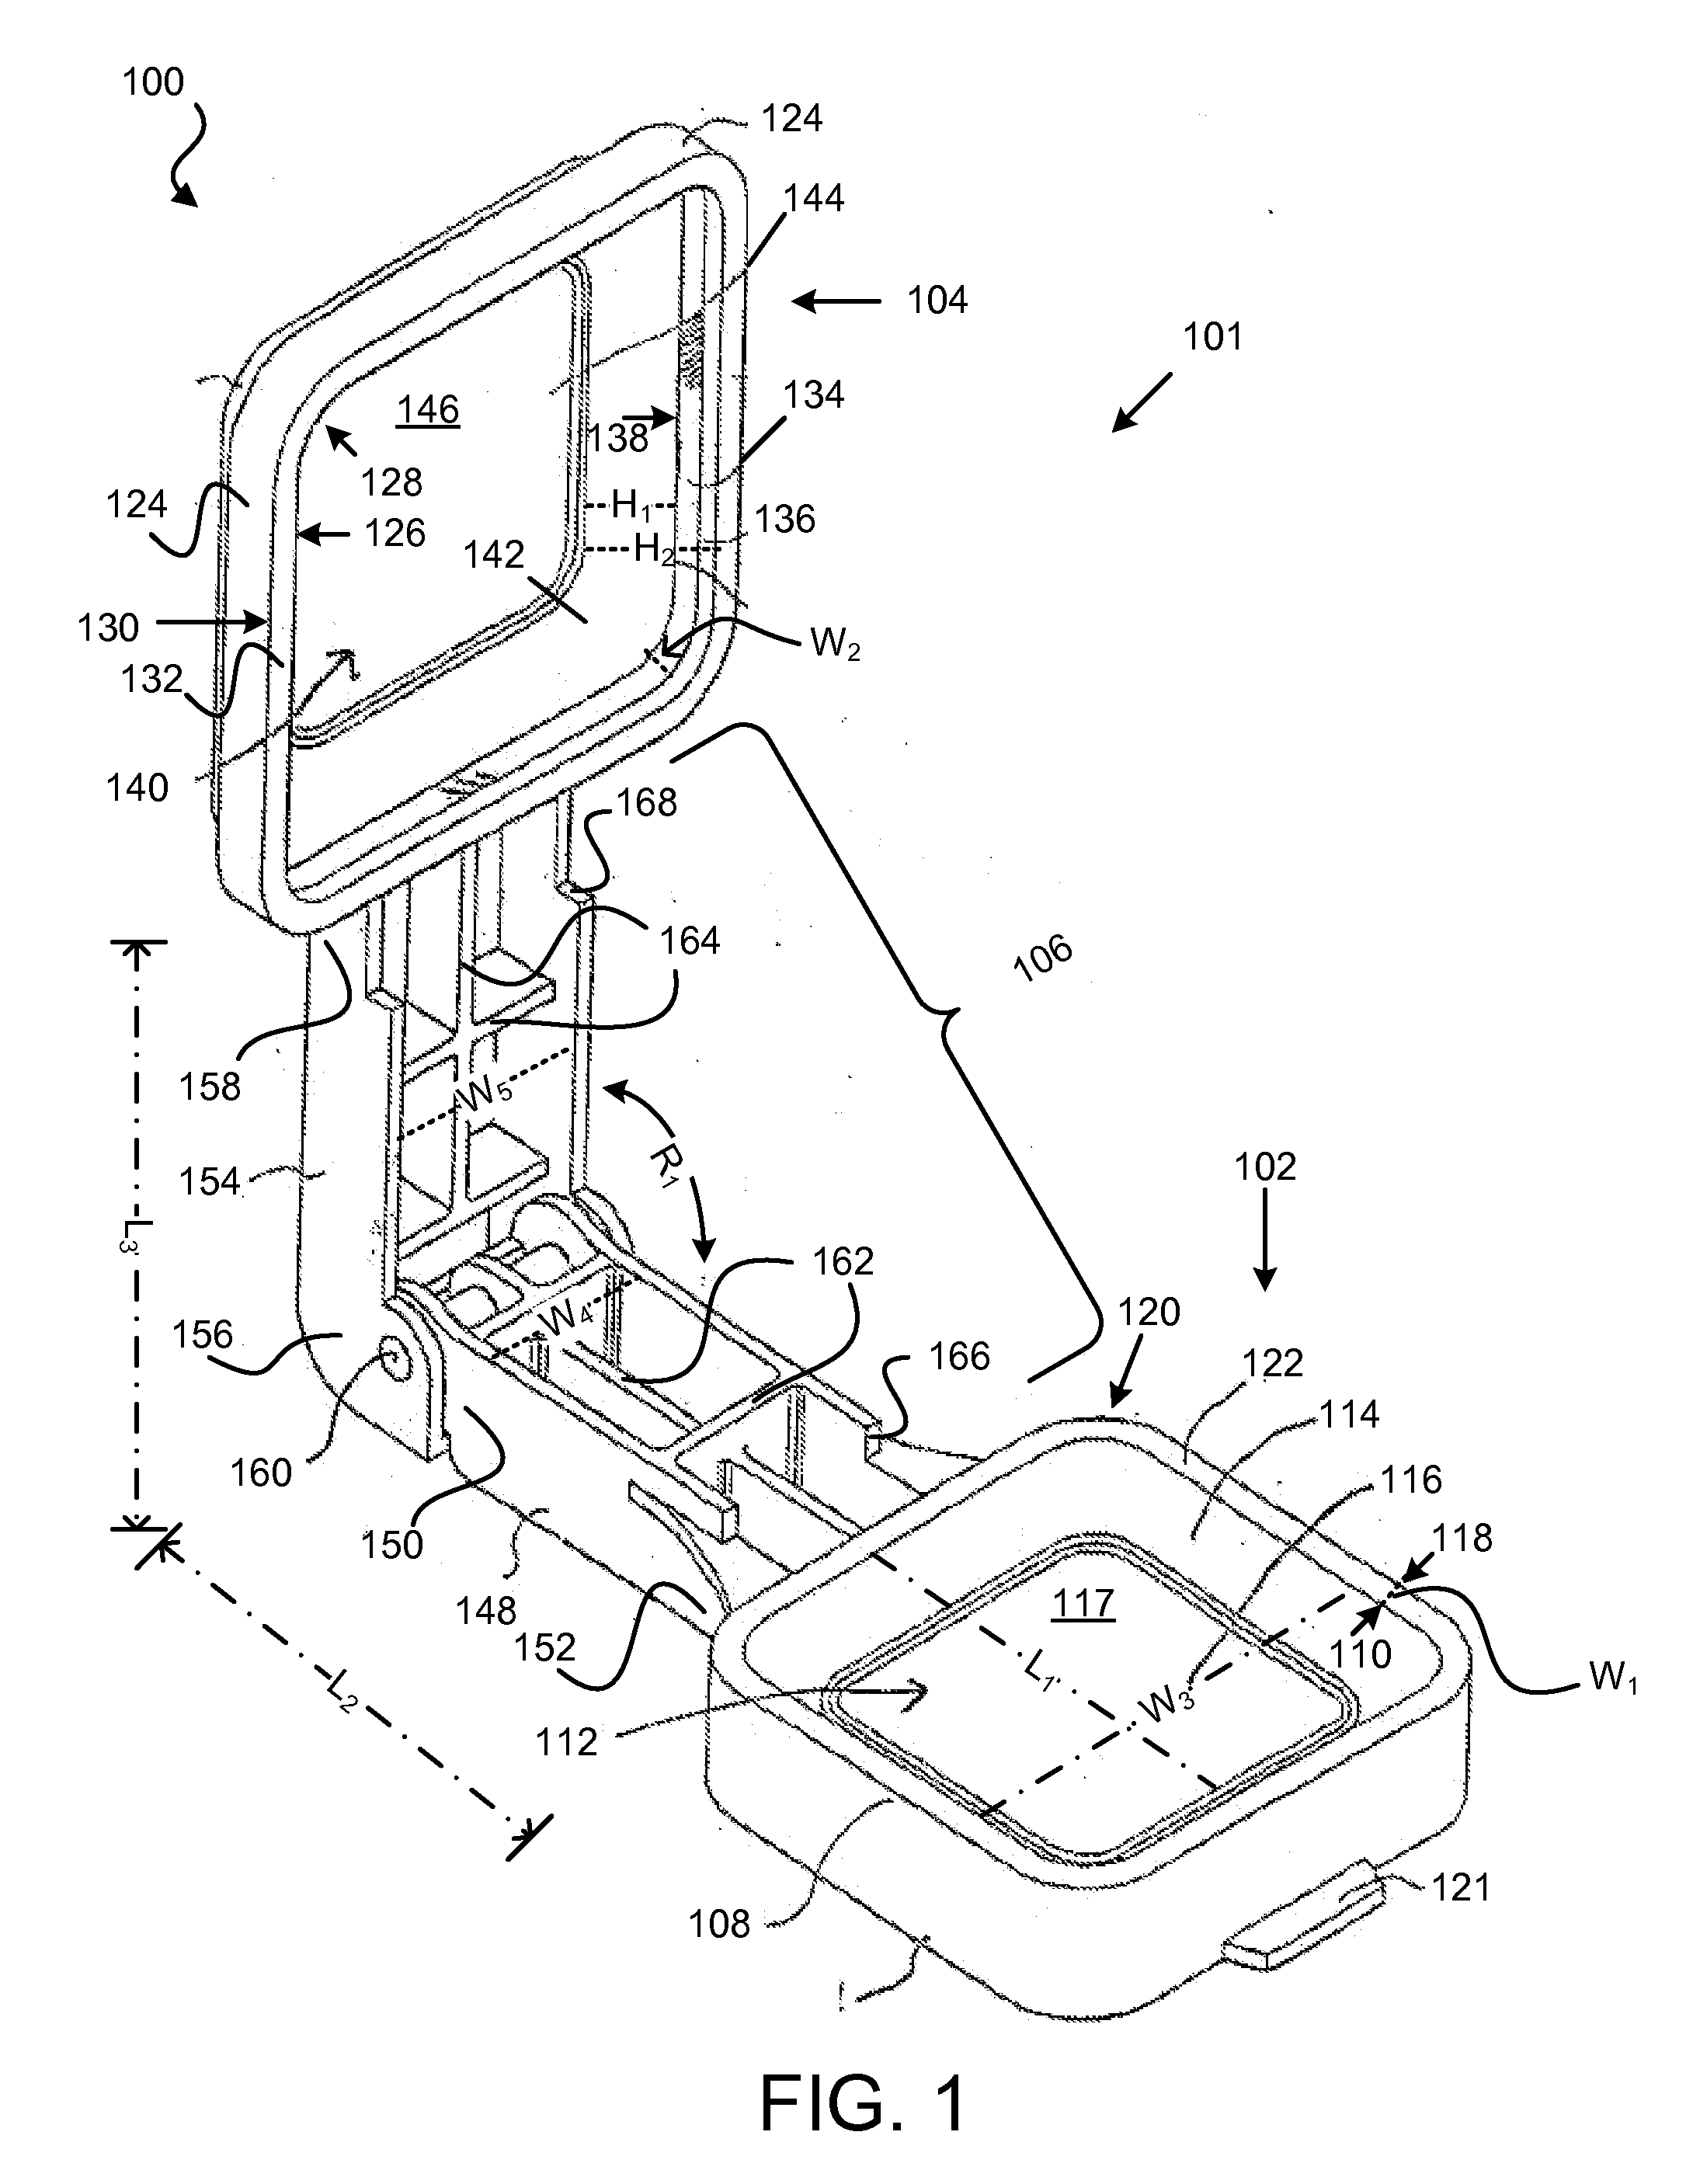 Apparatus, system, and method for making sandwiches